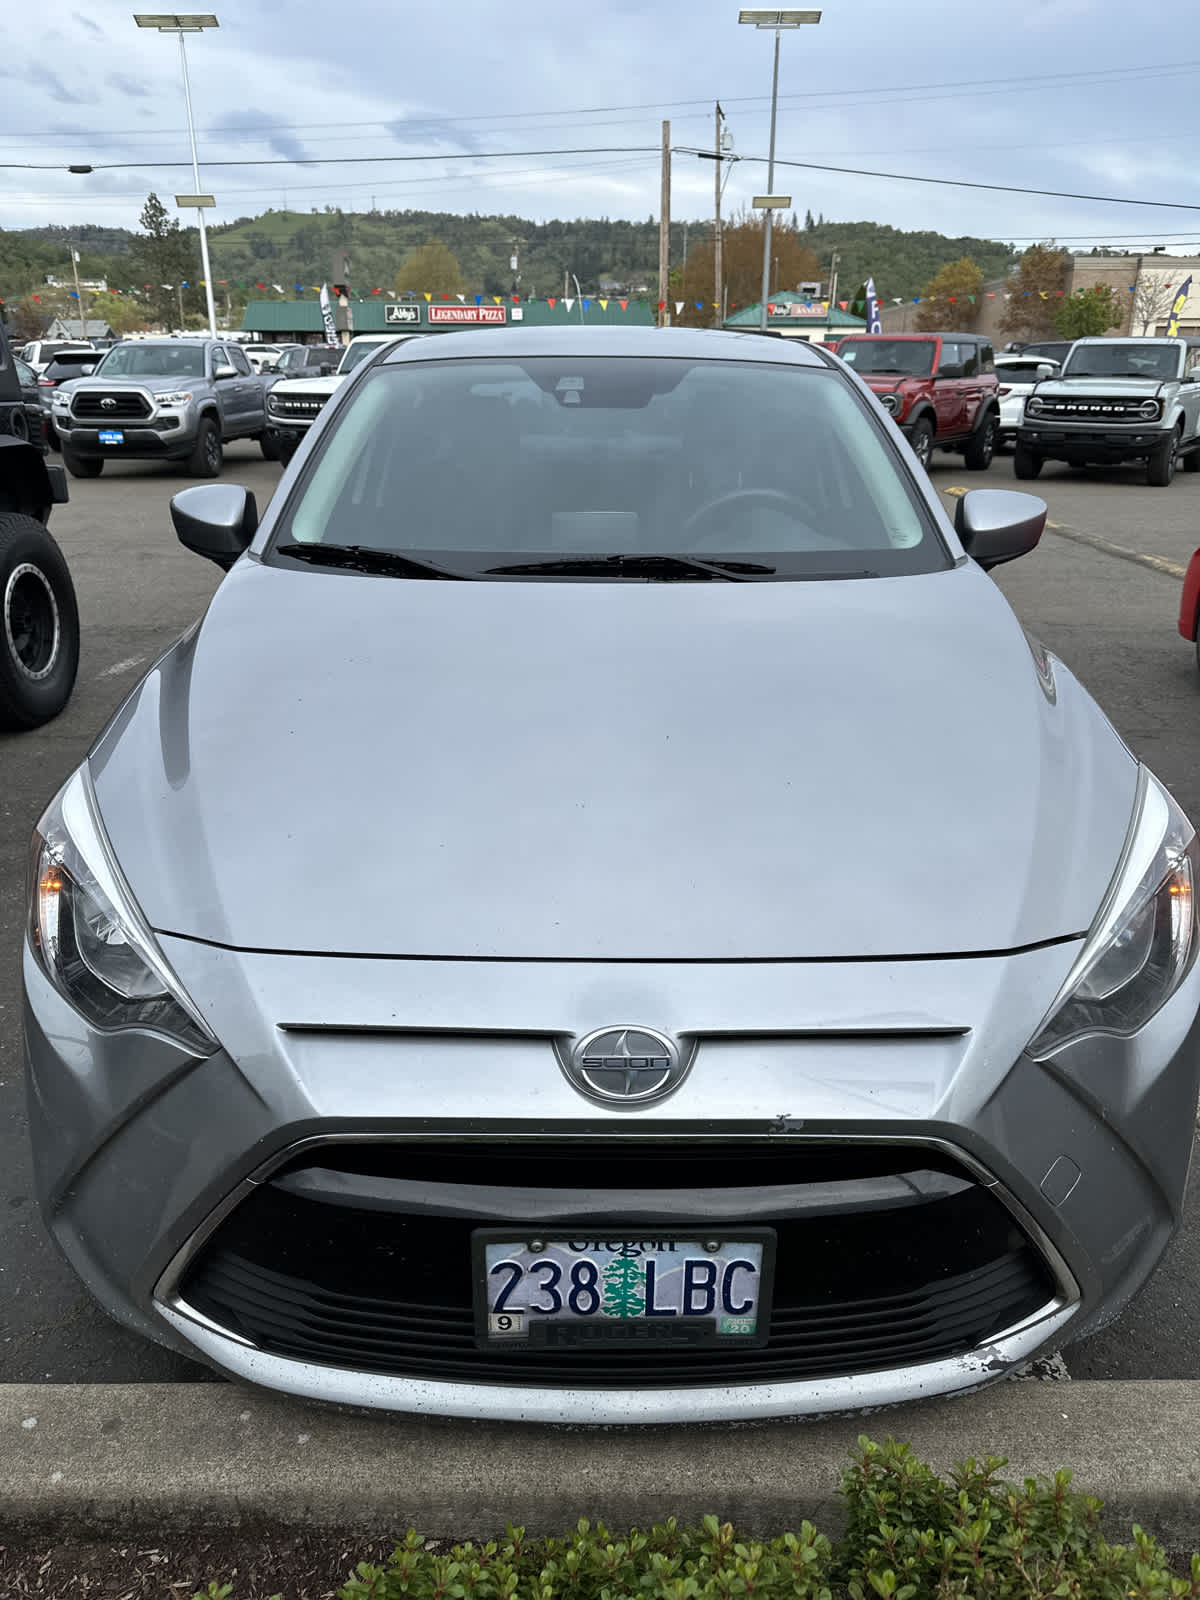 Used 2016 Scion iA  with VIN 3MYDLBZV8GY102716 for sale in Roseburg, OR